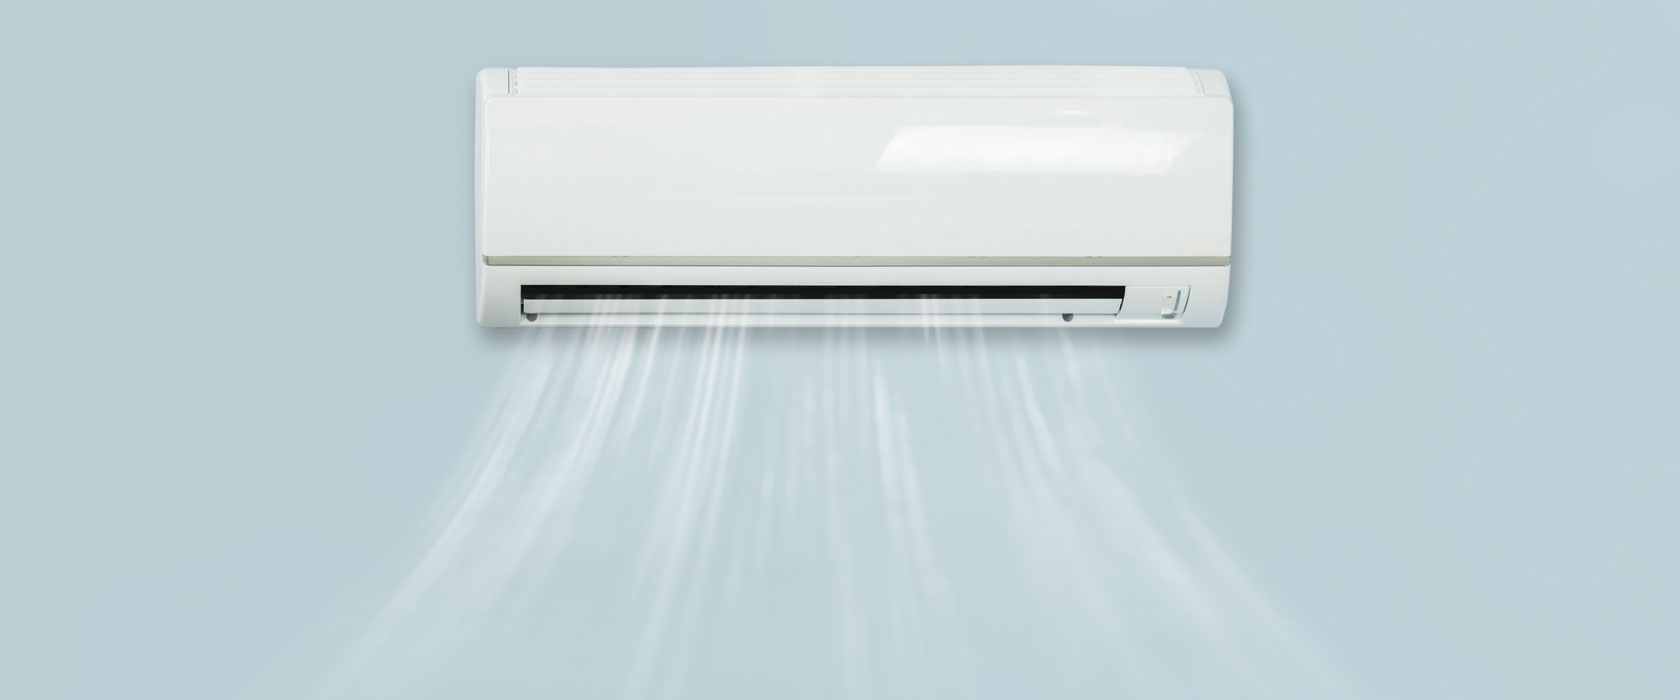 Air conditioner maintain and tune up